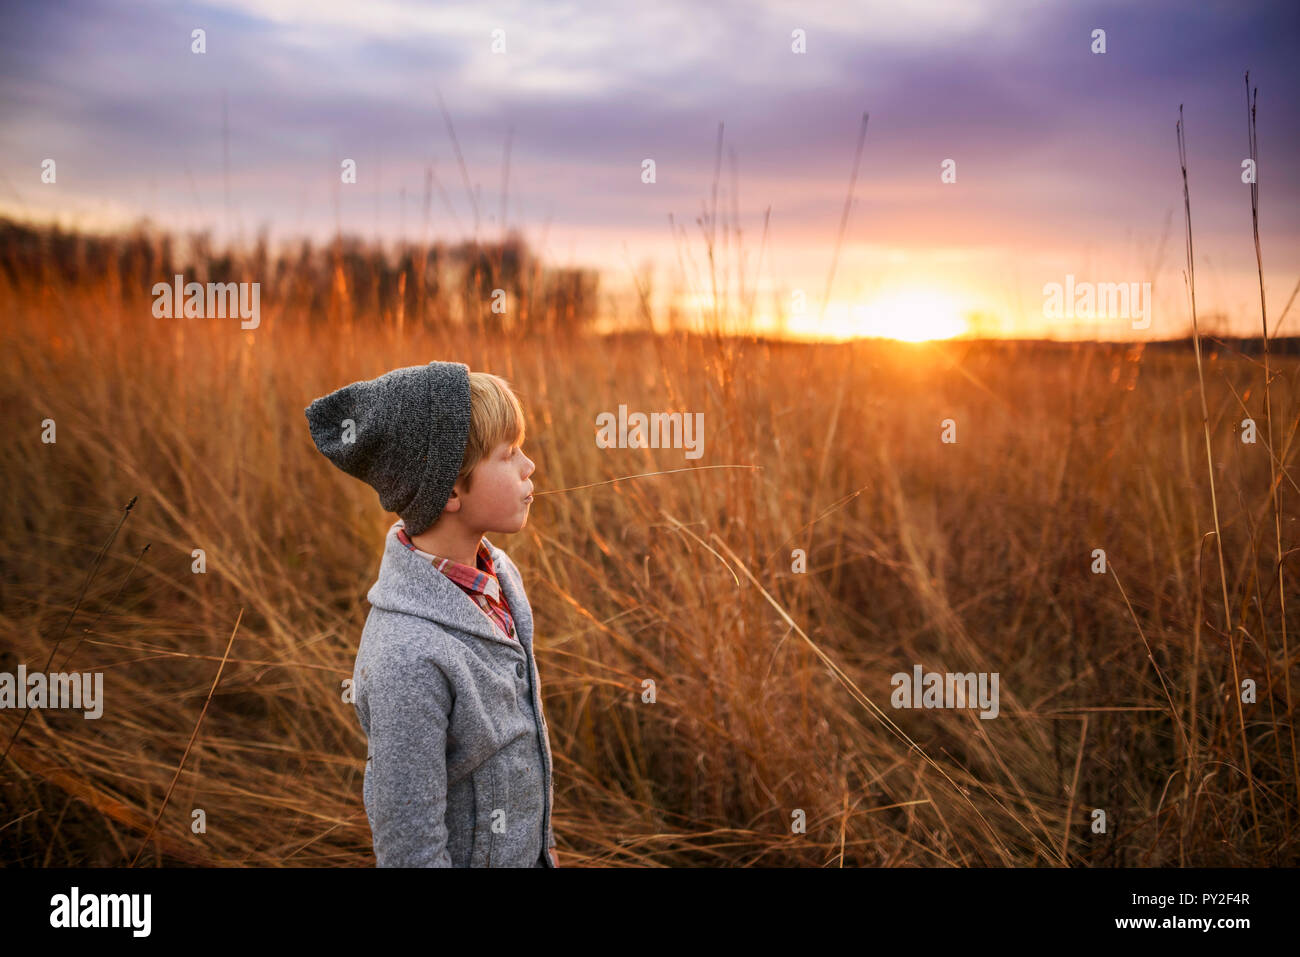 Boy standing in a field at sunset chewing a piece of long grass, United States Stock Photo